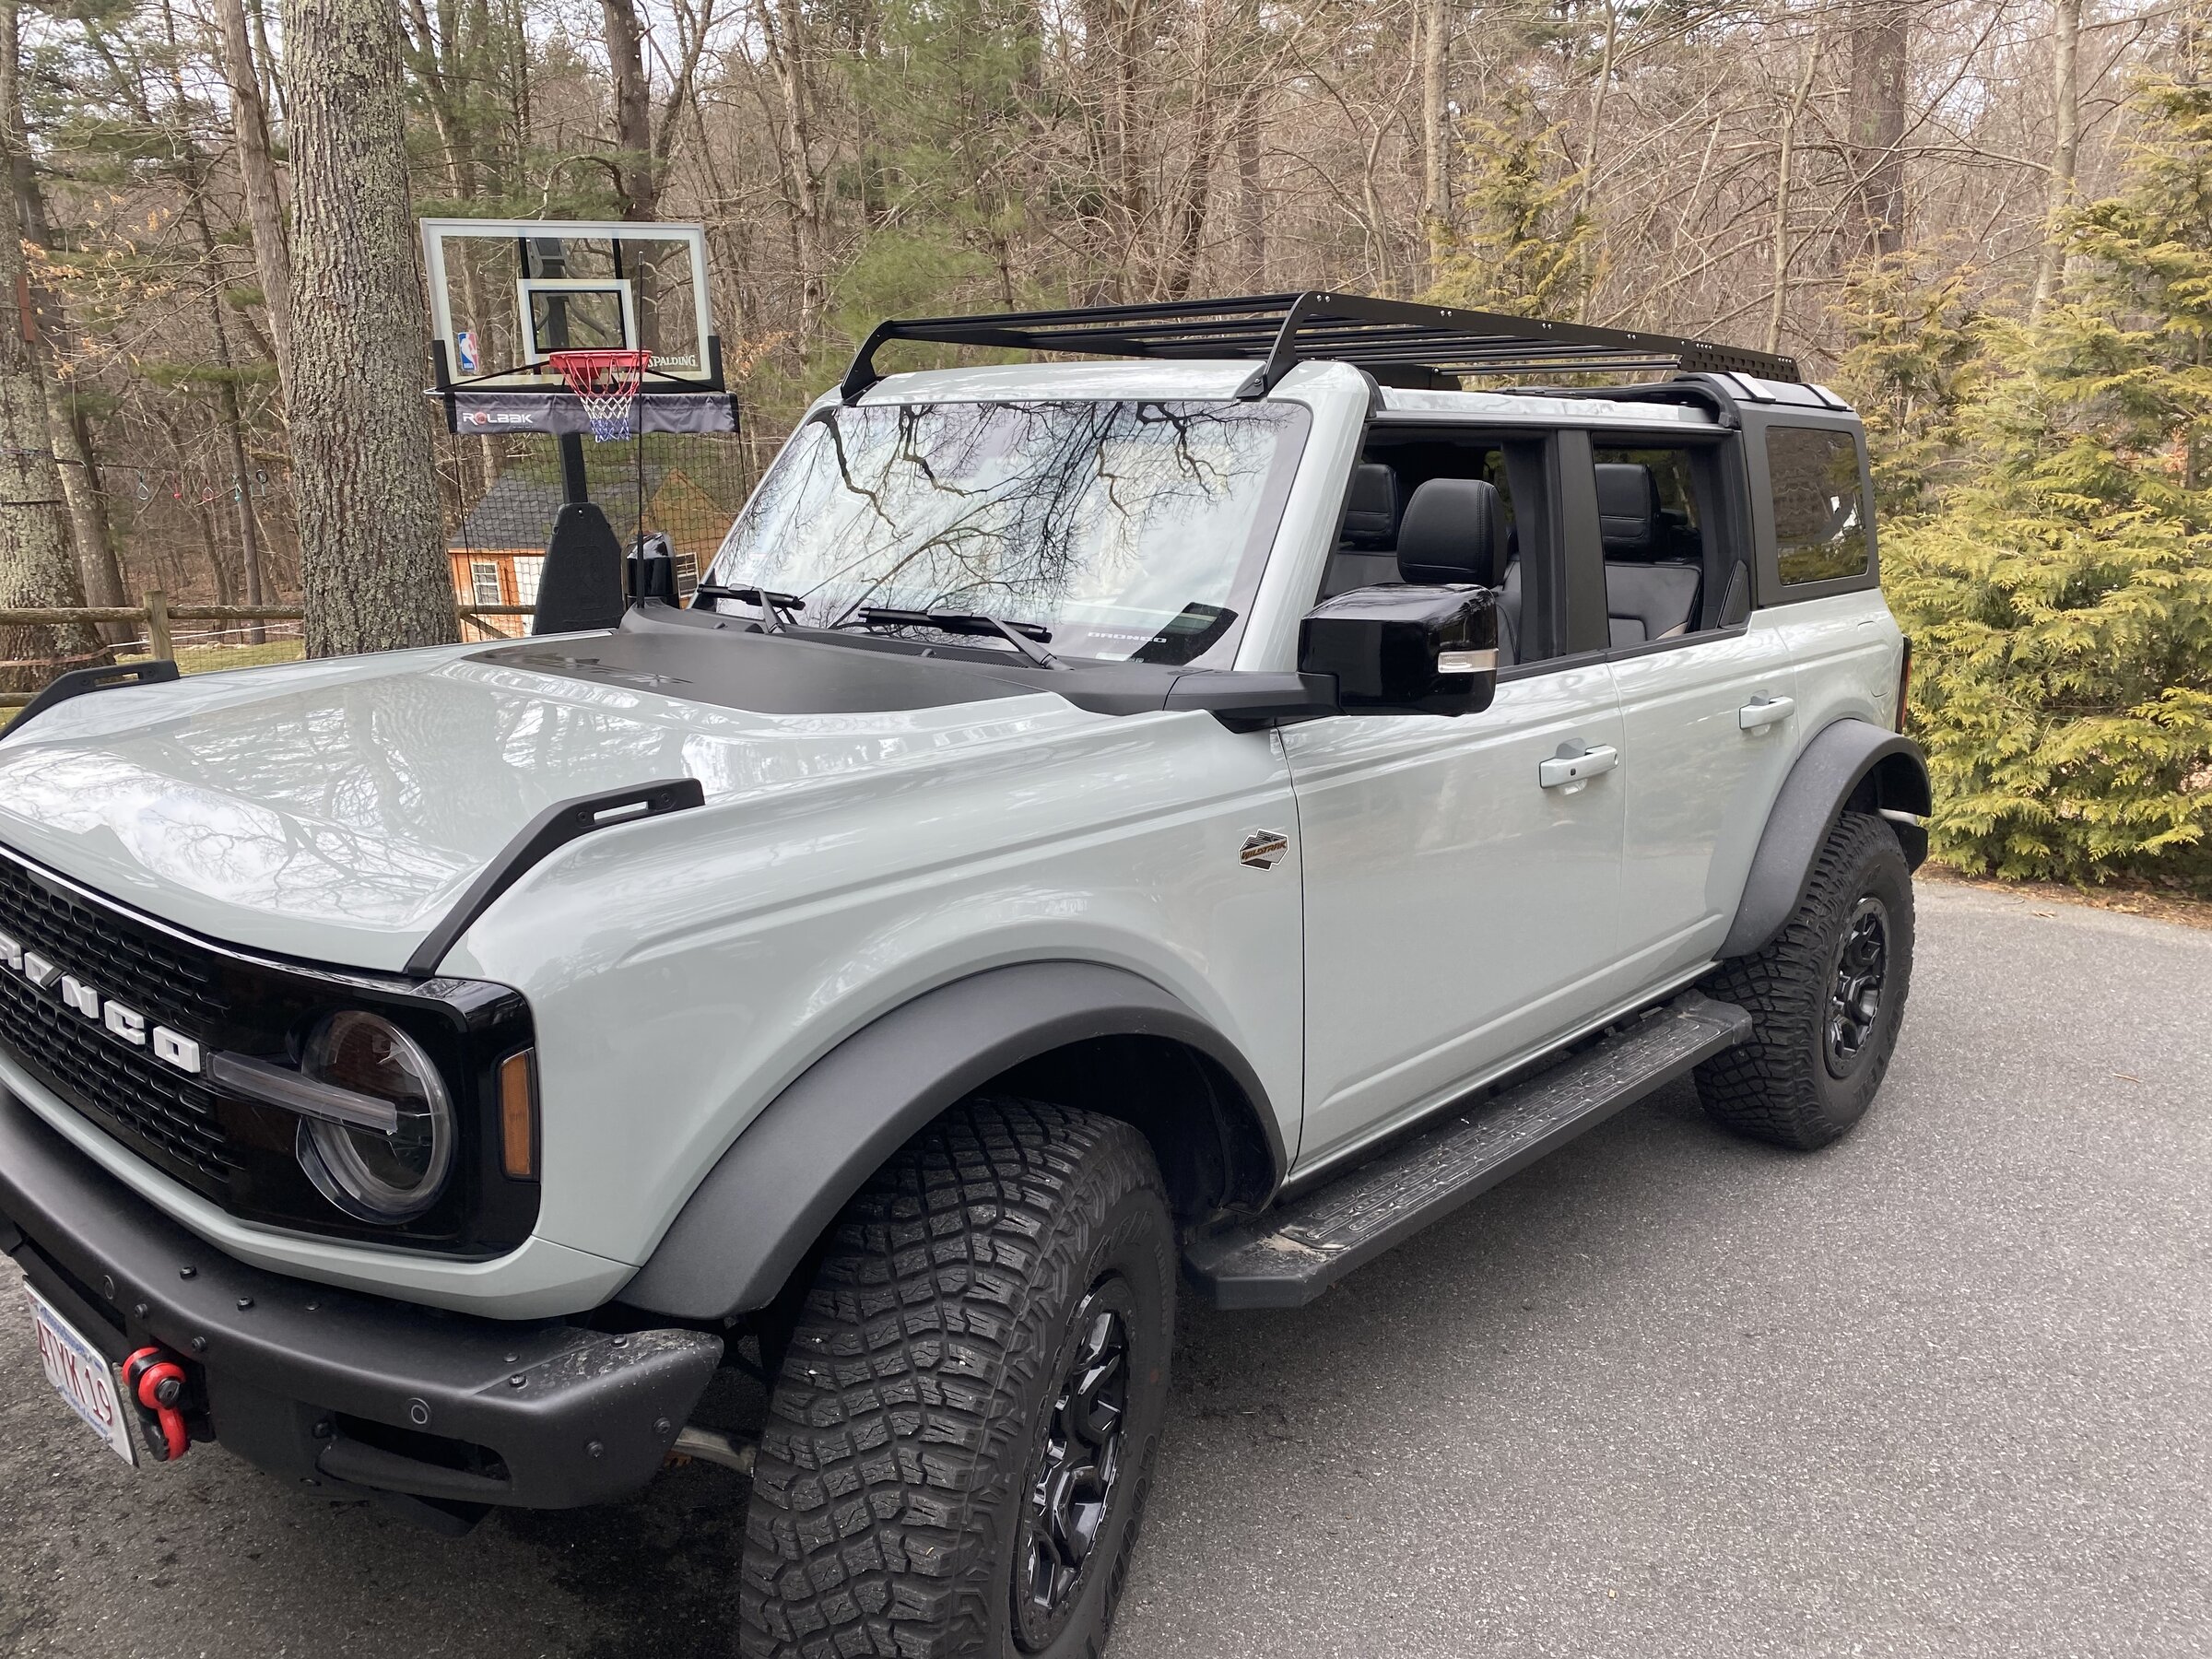 Ford Bronco Full Review w/Pics and Video: Badass Tents Roof Rack 20220307_121505